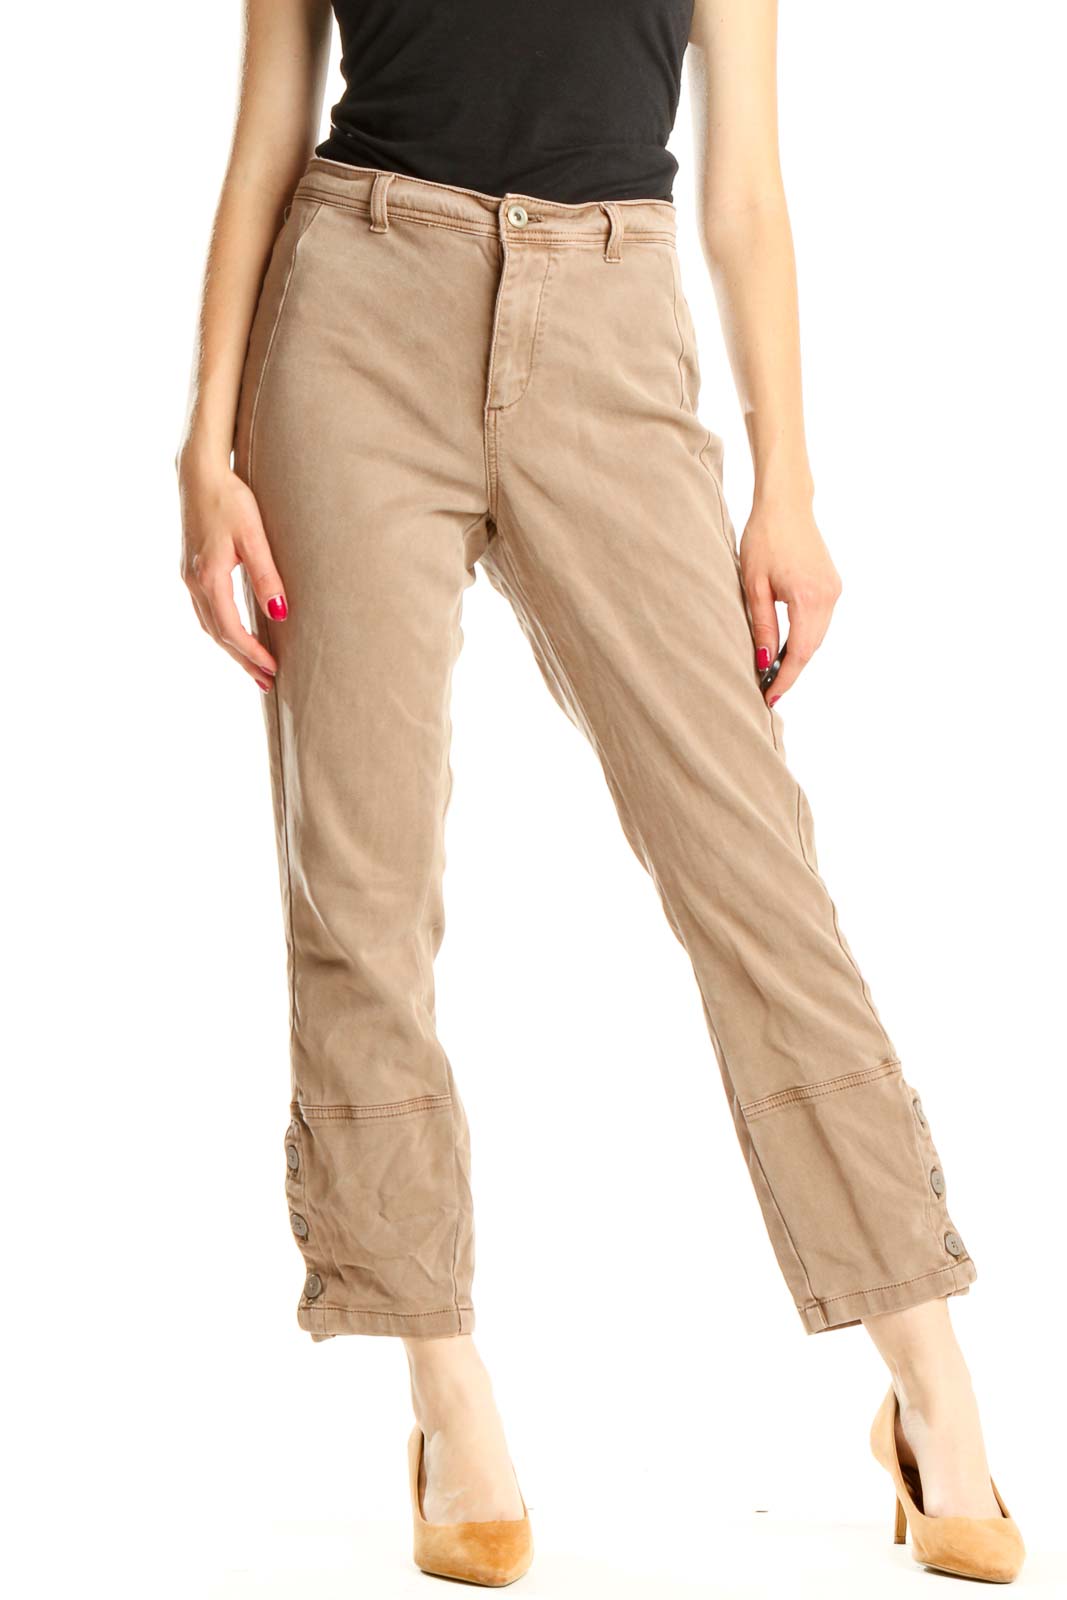 Tan Classic Cropped Cargos Pants Front